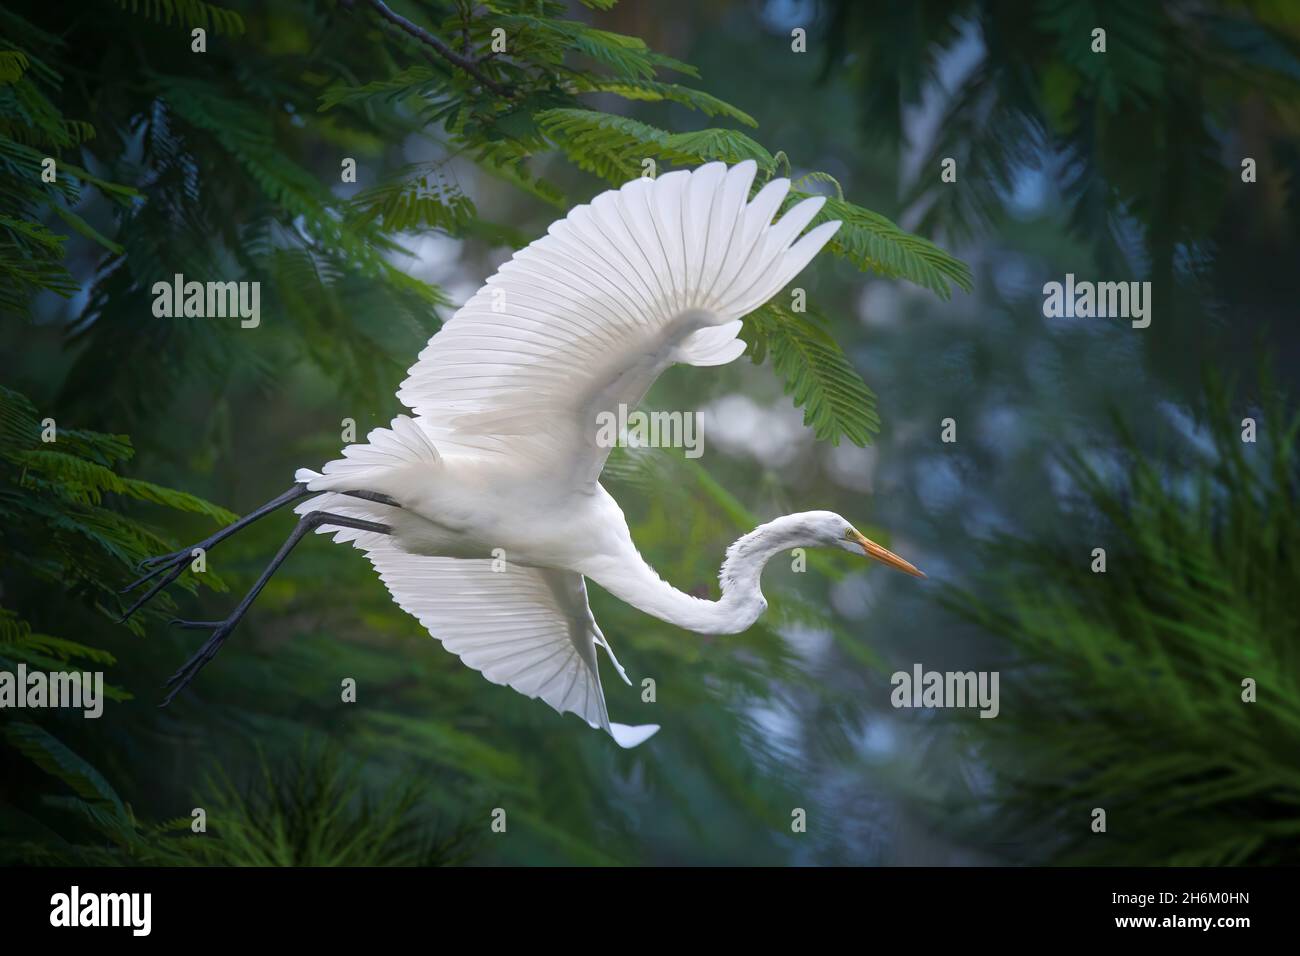 A Great White Egret takes flight from a Royal Poinciana tree in Everglades National Park. Stock Photo